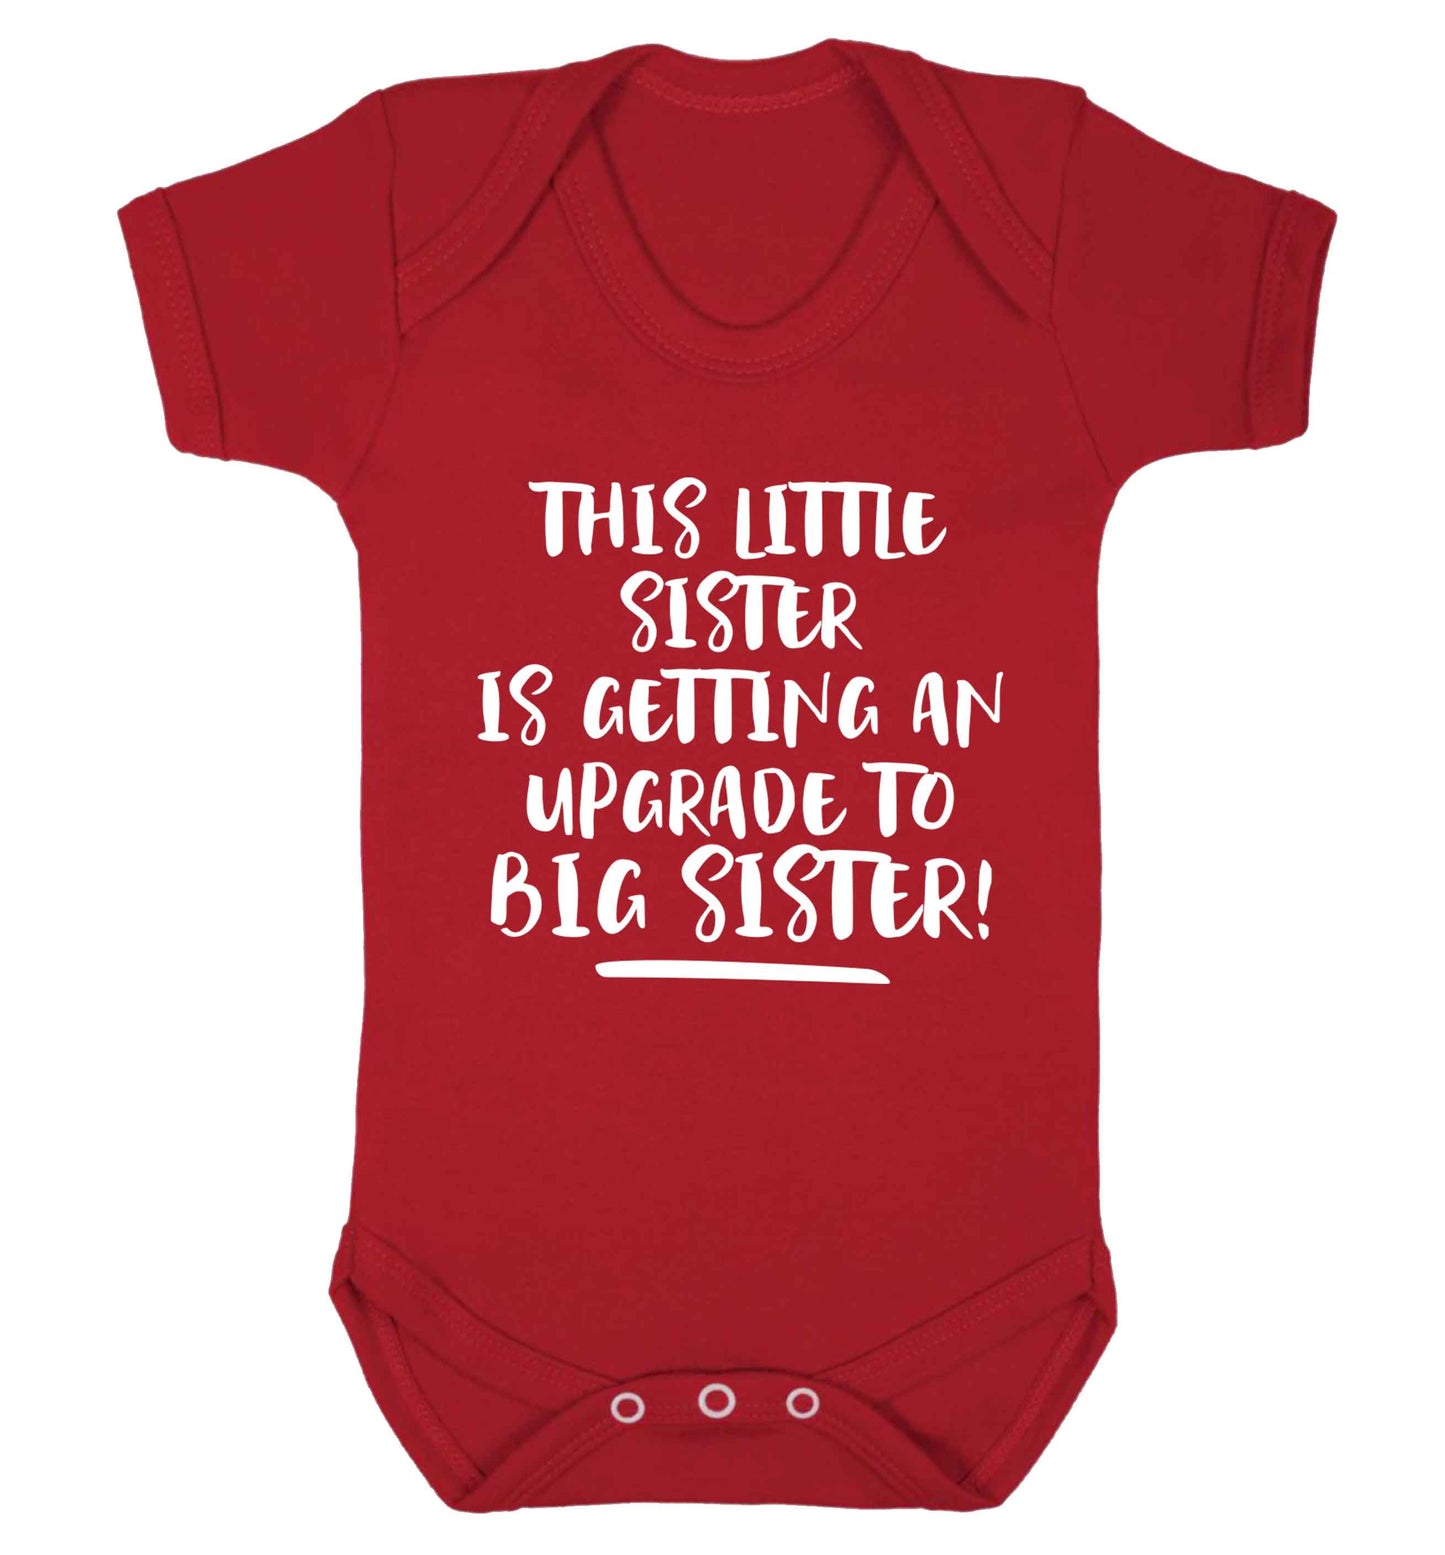 This little sister is getting an upgrade to big sister! Baby Vest red 18-24 months